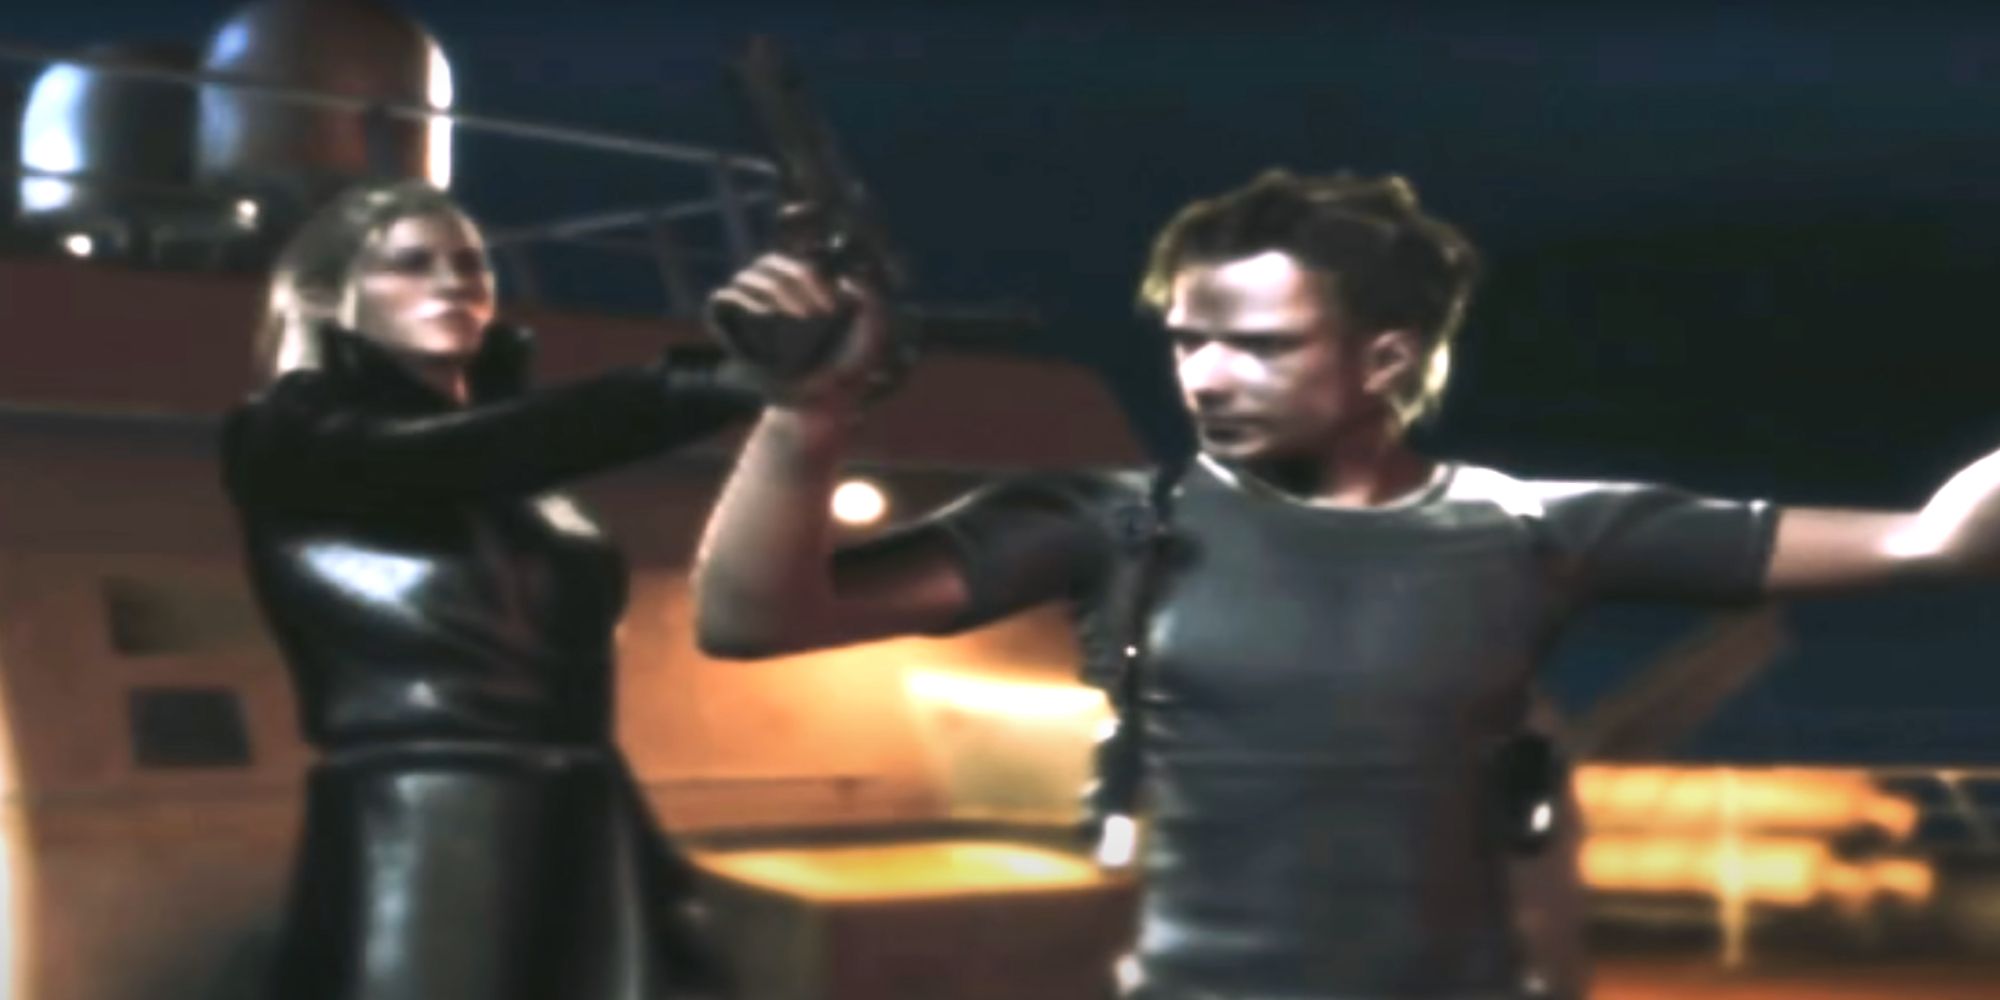 Resident Evil Dead Aim Screenshot Of Opening Cutscene with Morpheus pointing a gun at Bruce, as he has his raised in the air and both hands up.